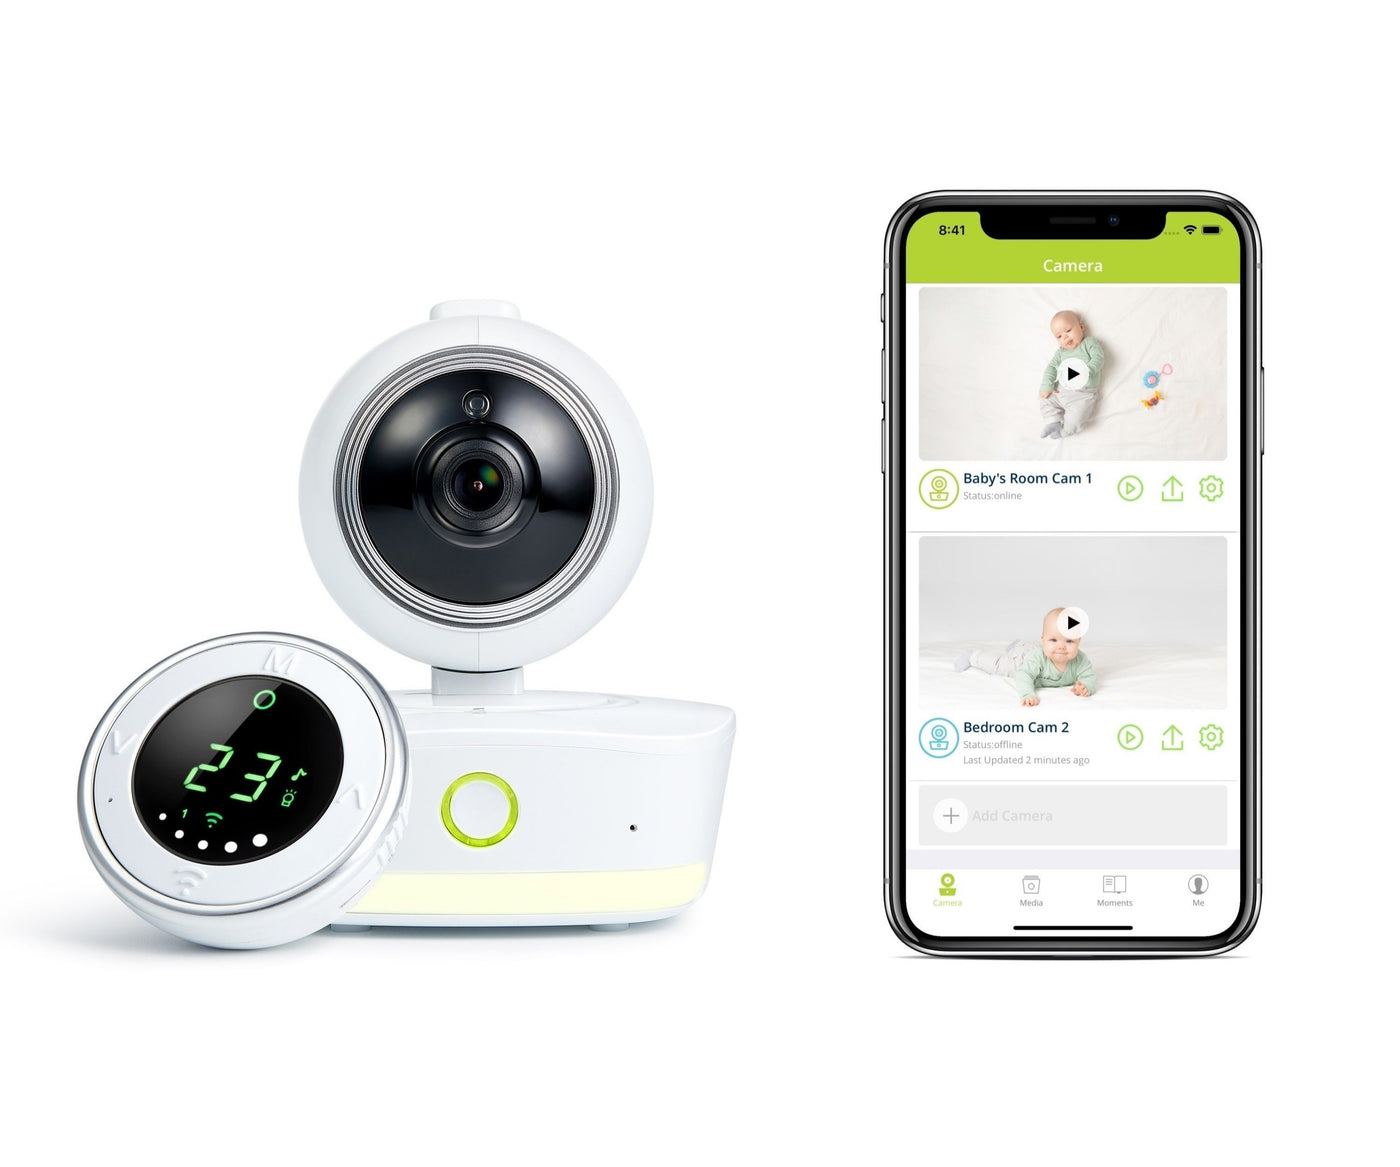 Bebcare iQ - Smart HD Baby Monitor: Full HD 1080p Video, Pan-and-Tilt, Temperature Sensor, Motion and Sound Alert, Stand-Alone Audio Monitor Unit